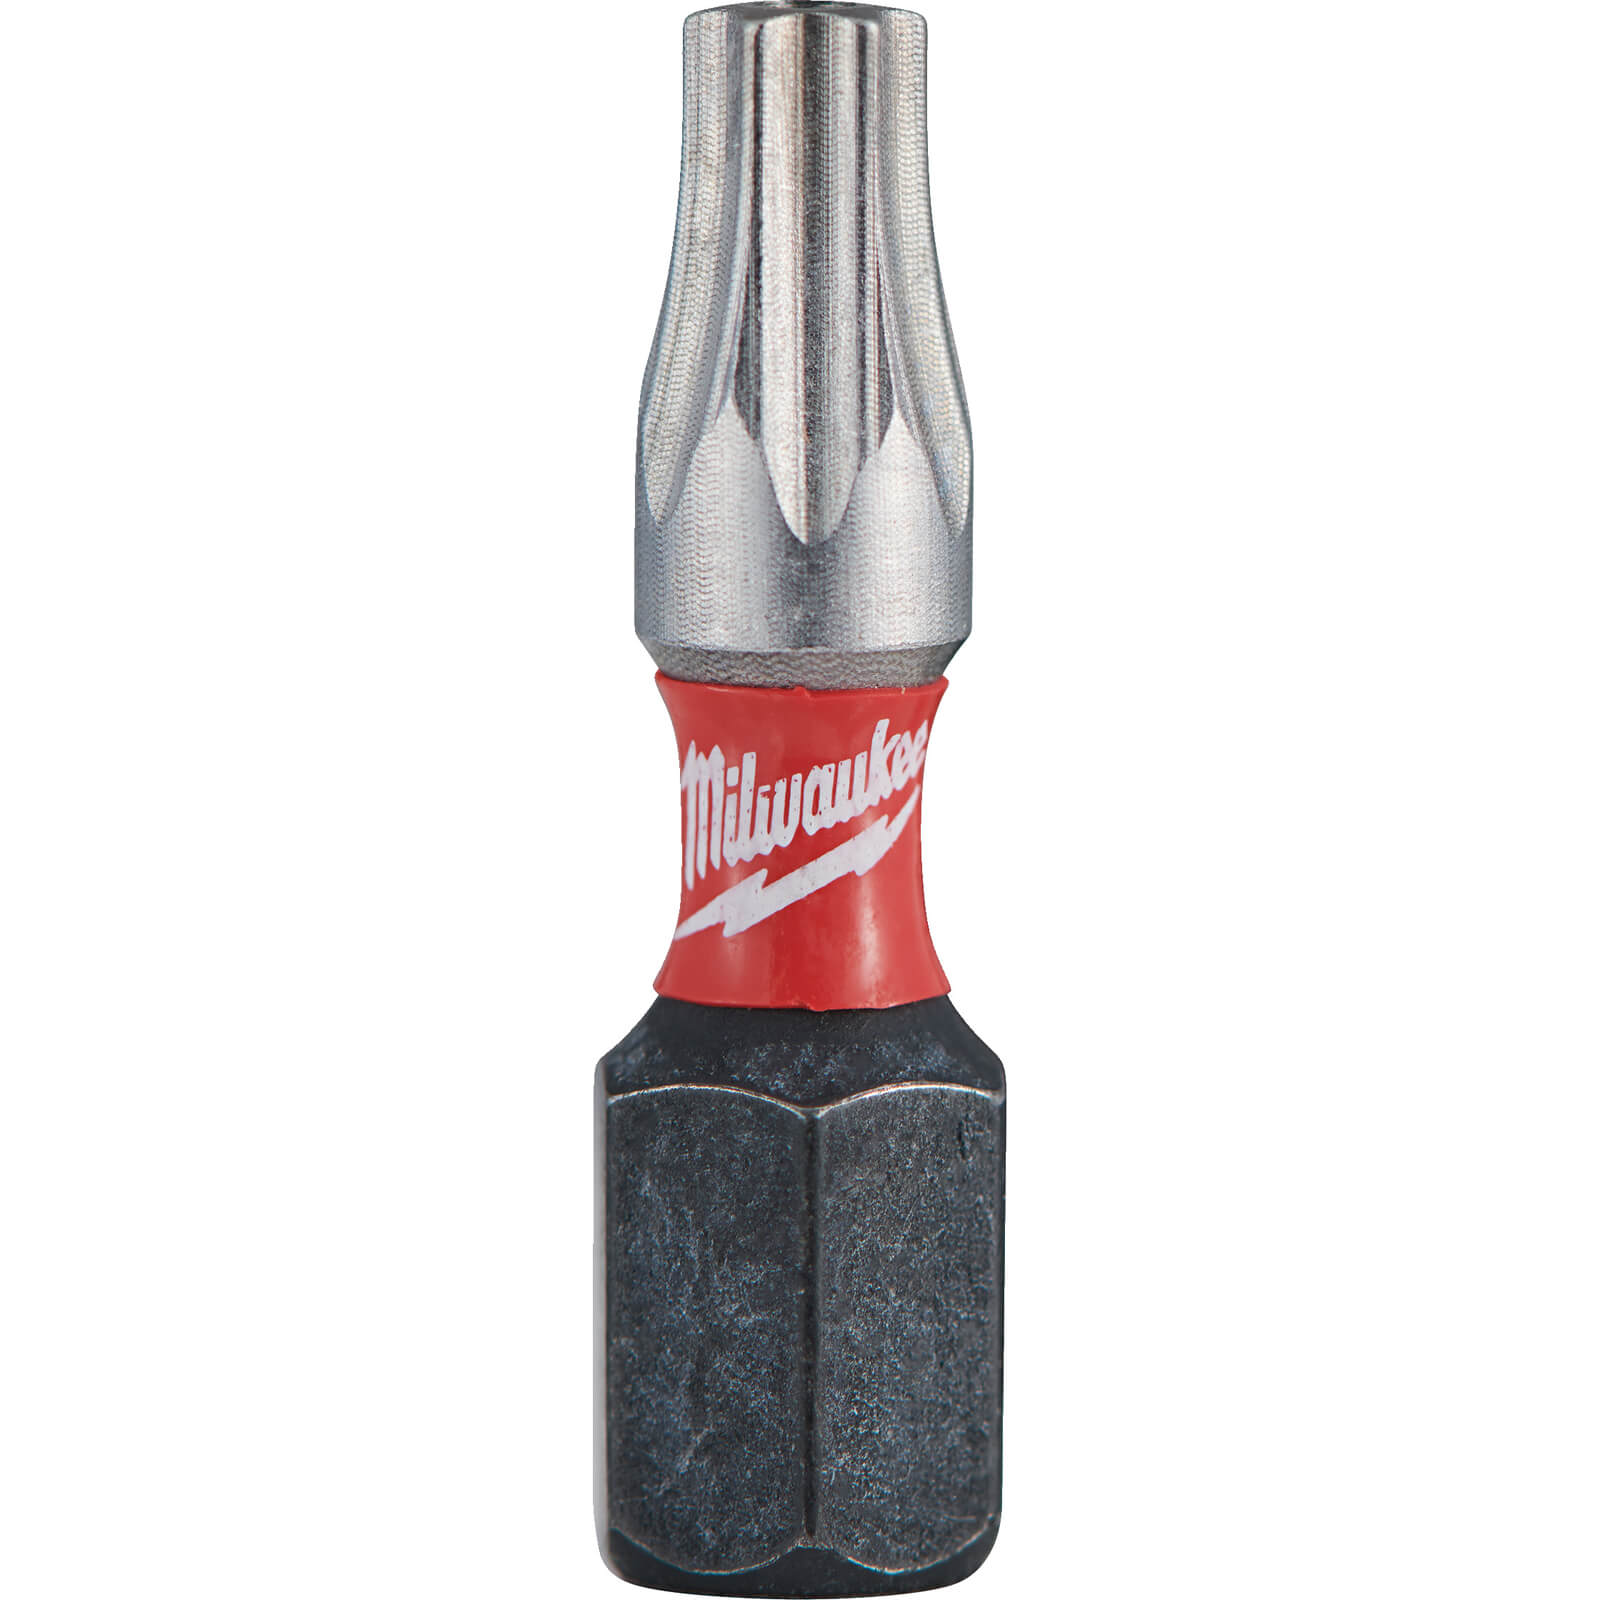 Image of Milwaukee Shockwave Impact Duty Security Torx Screwdriver Bits TX BO20 25mm Pack of 2